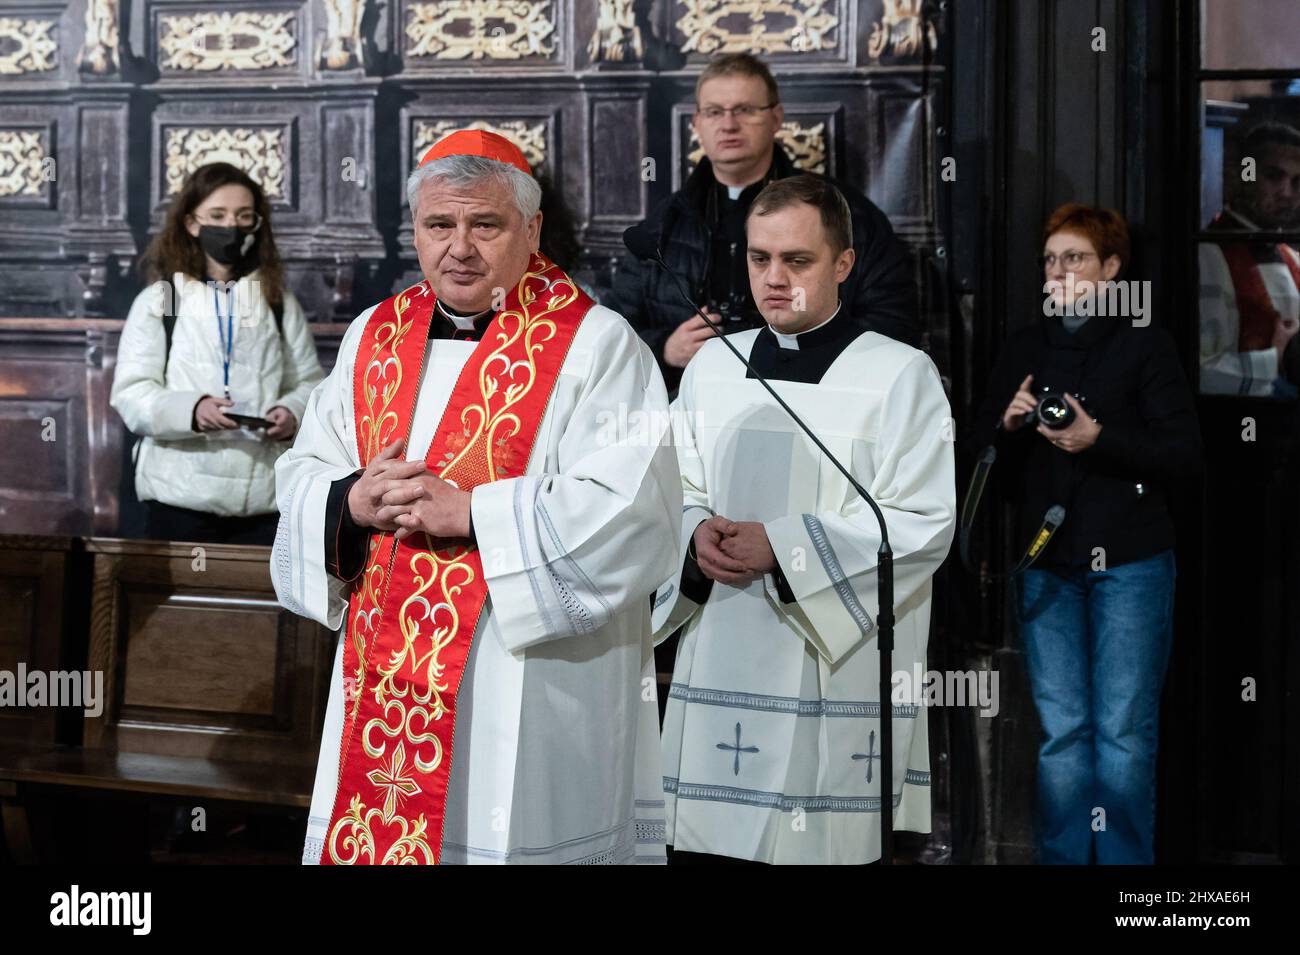 Lviv, Ukraine. 10th Mar, 2022. Cardinal Konrad Krajewski (C) seen at the Cathedral. The Polish Cardinal Konrad Krajewski, the Papal Almoner in Ukraine, attended the interfaith prayer service at the Cathedral of the Assumption of the Blessed Virgin Mary (Lviv Metropolitan Basilica) in Lviv at the presence of representatives of the Pan-Ukrainian Council of Churches and different religious communities. (Photo by Valeria Ferraro/SOPA Images/Sipa USA) Credit: Sipa USA/Alamy Live News Stock Photo